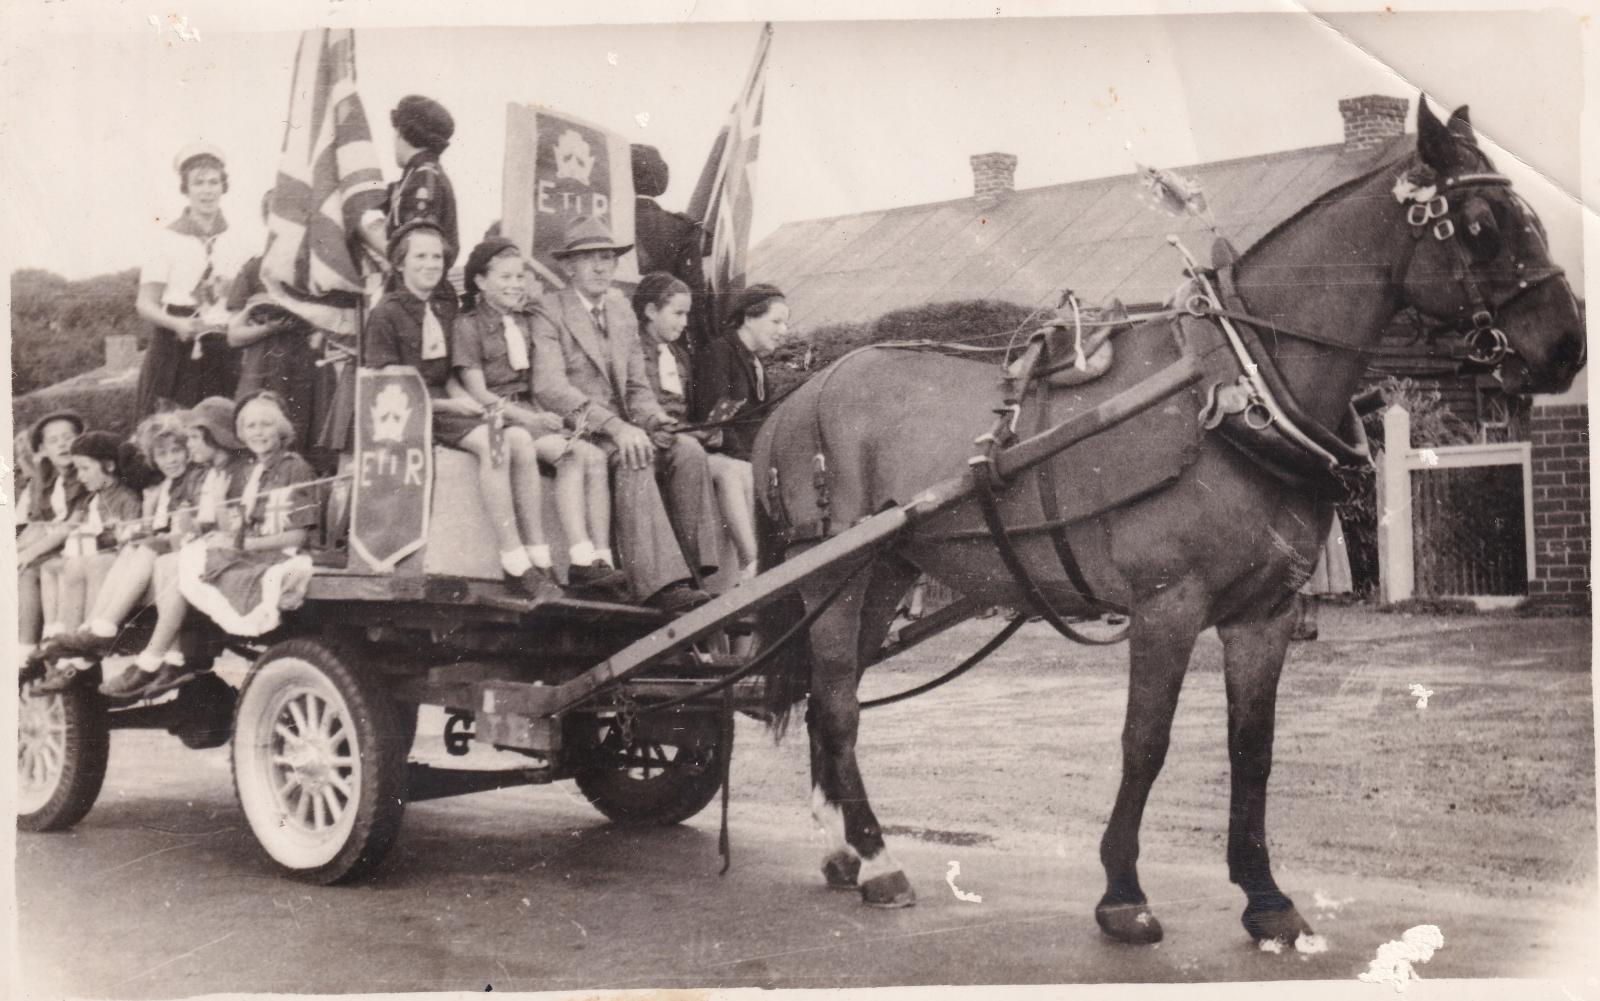 Jim Blain with Girl Guides in the wagon in Coronation Parade 1954